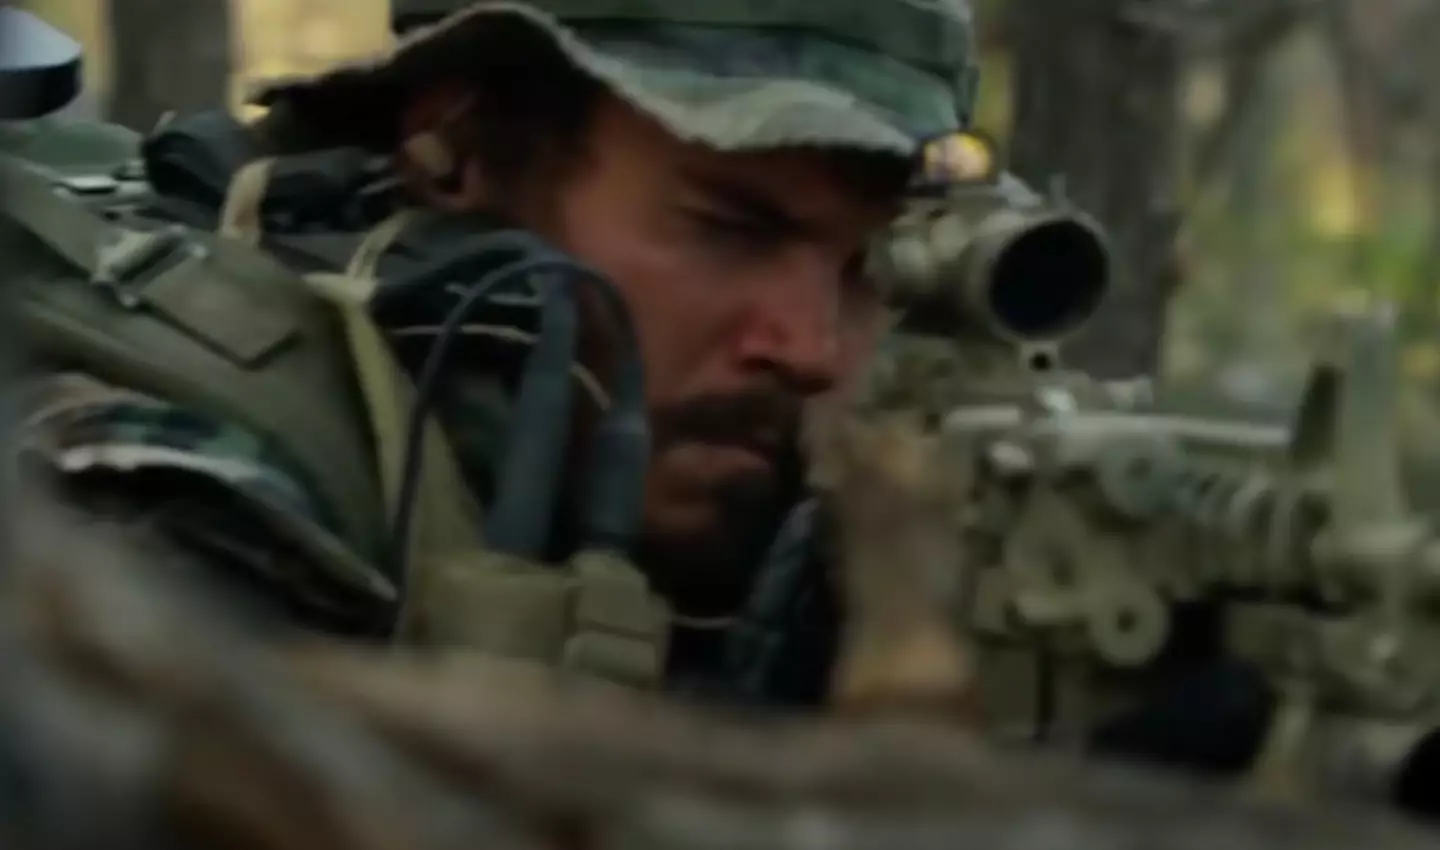 Irving was very impressed by the shootout in 'Lone Survivor'.